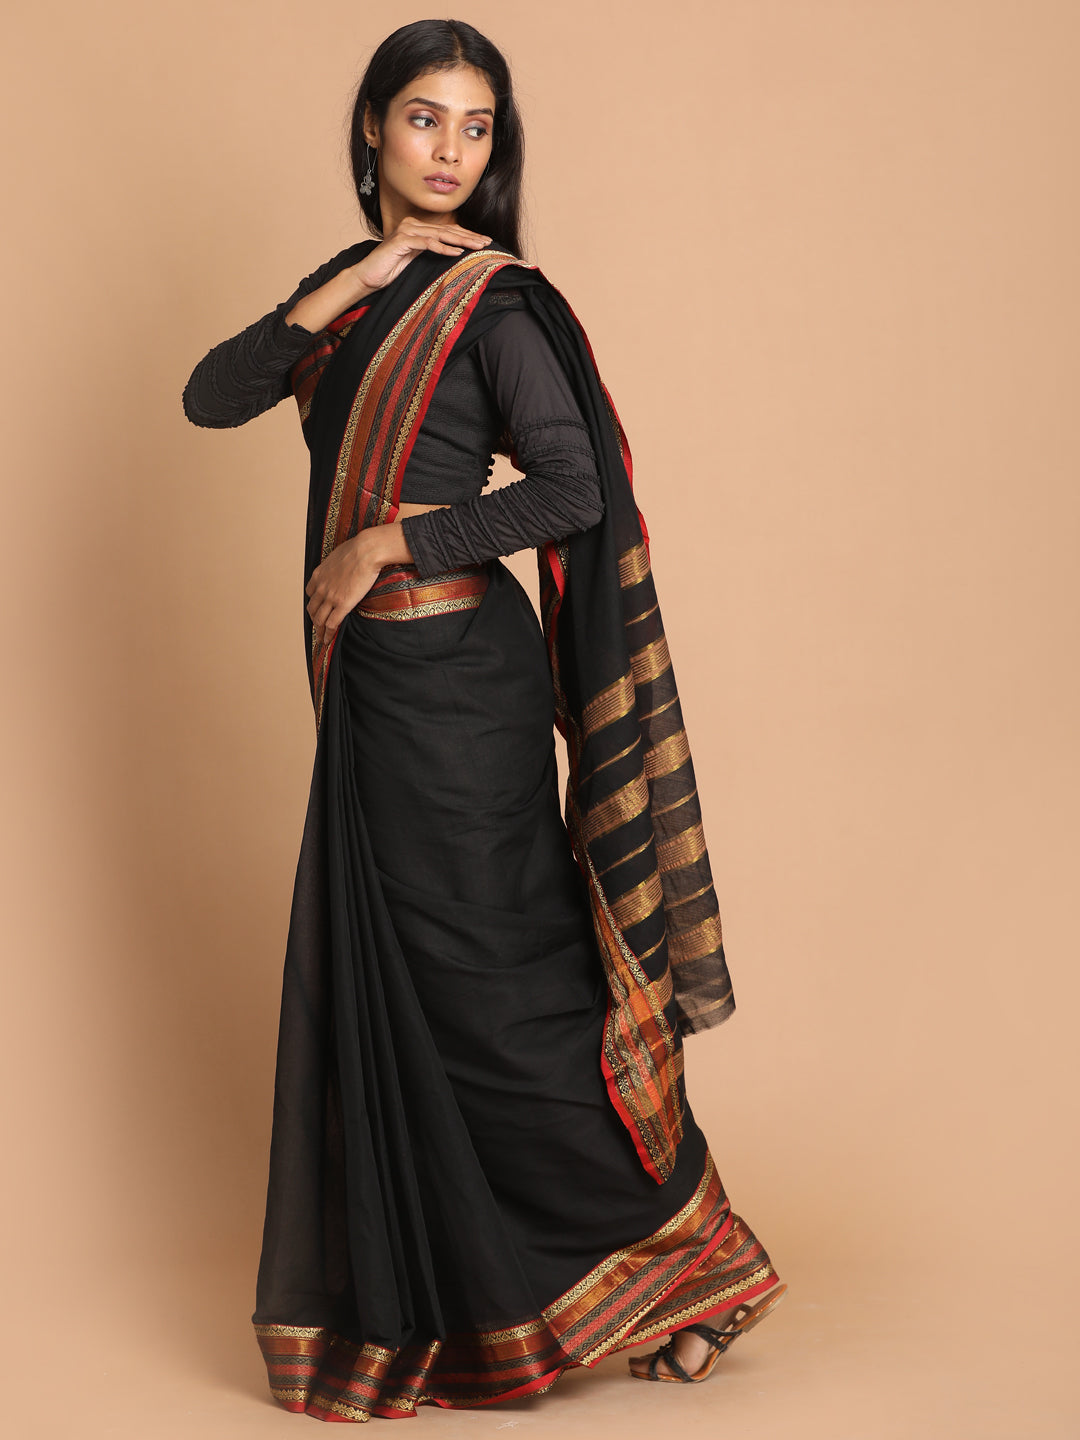 Indethnic Black Pure Cotton Solid Saree - View 1